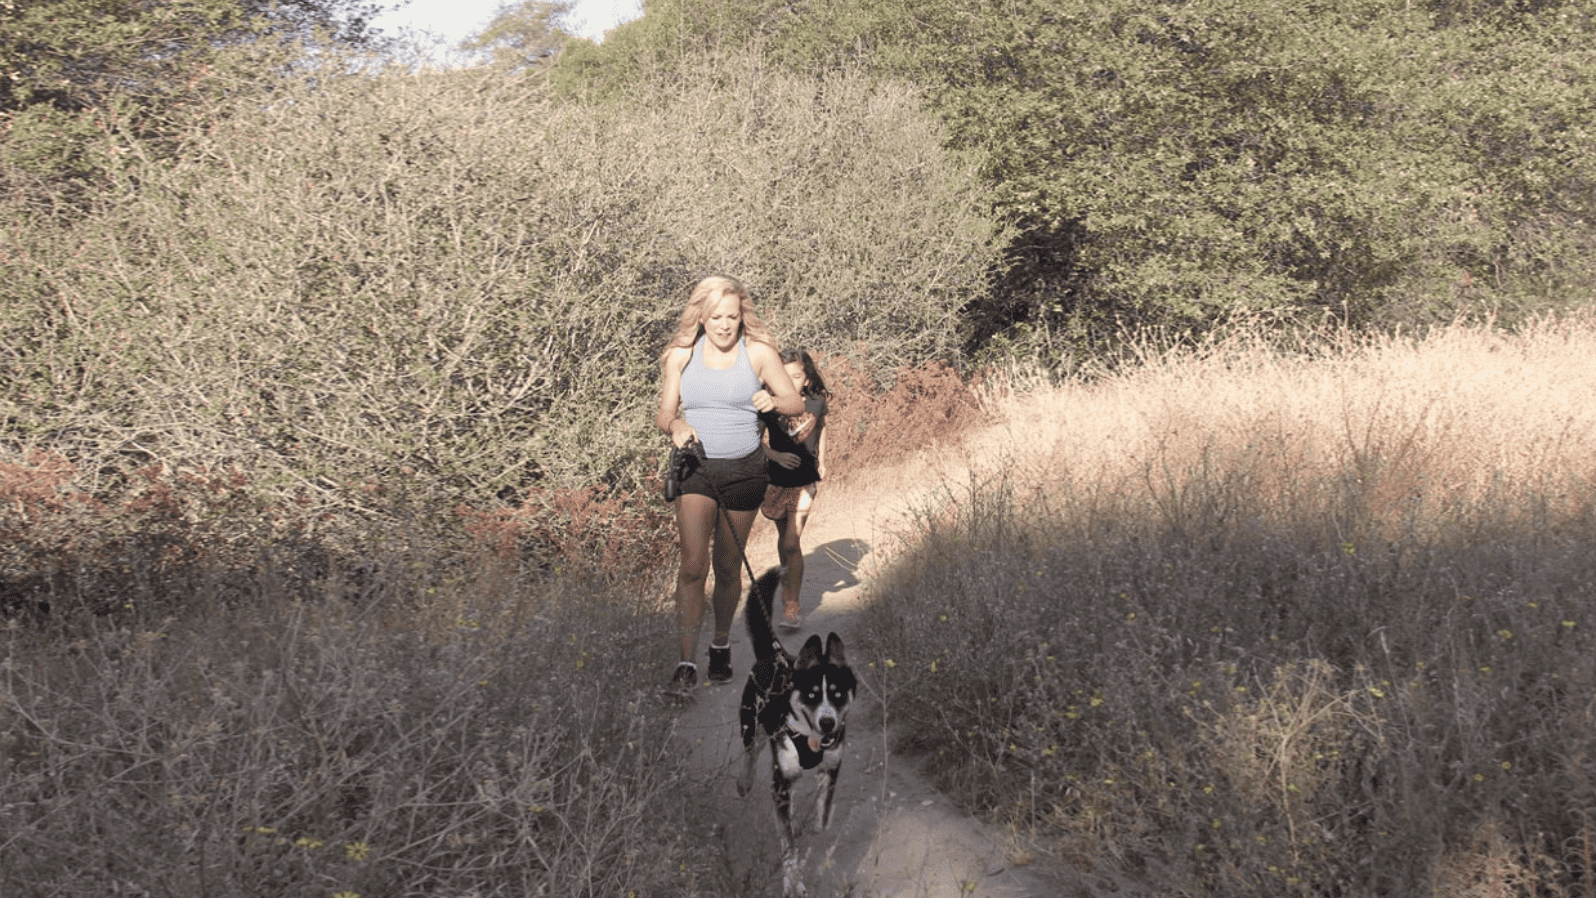 A woman and girl jogging a dog down a dirt trail.